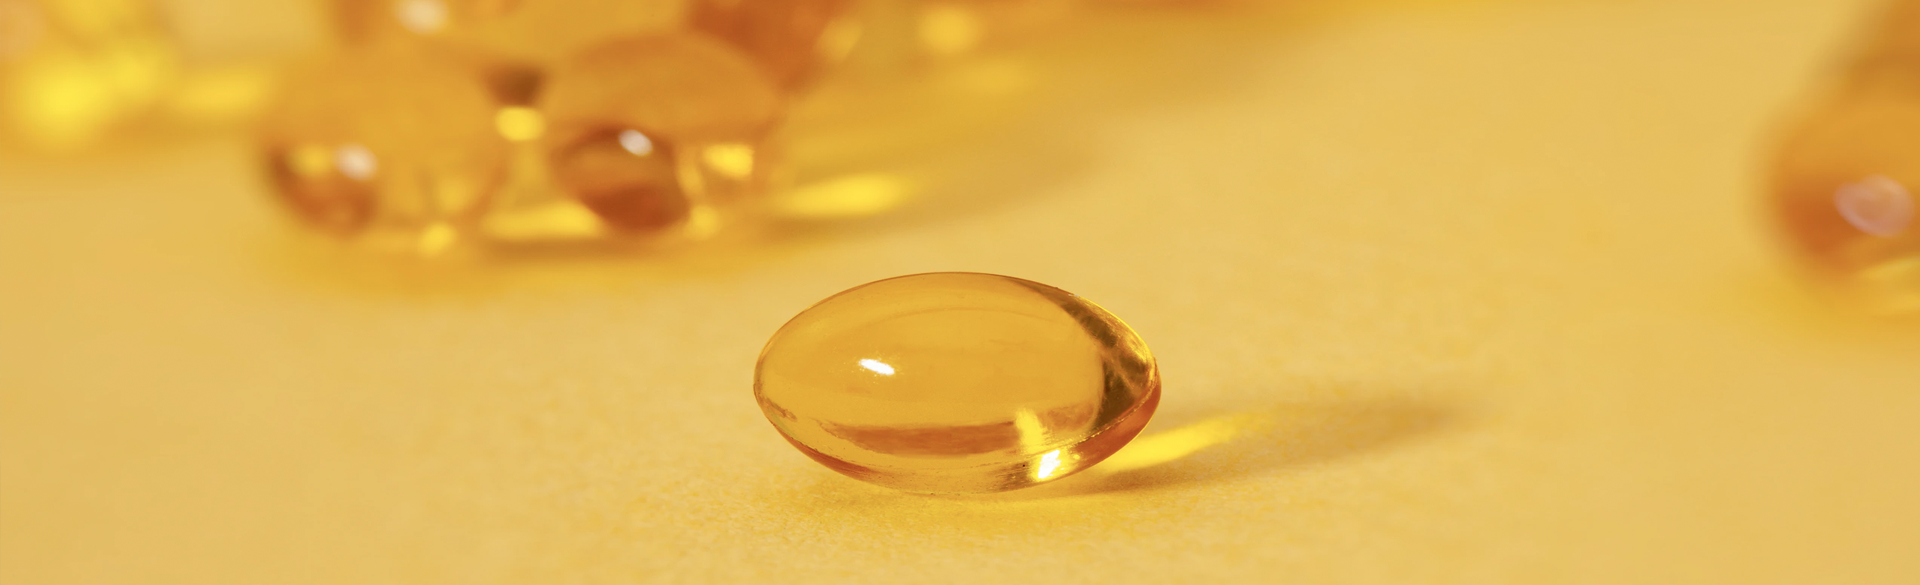 High Doses of Vitamin D for Critically Ill Patients Yield Minimal Benefit